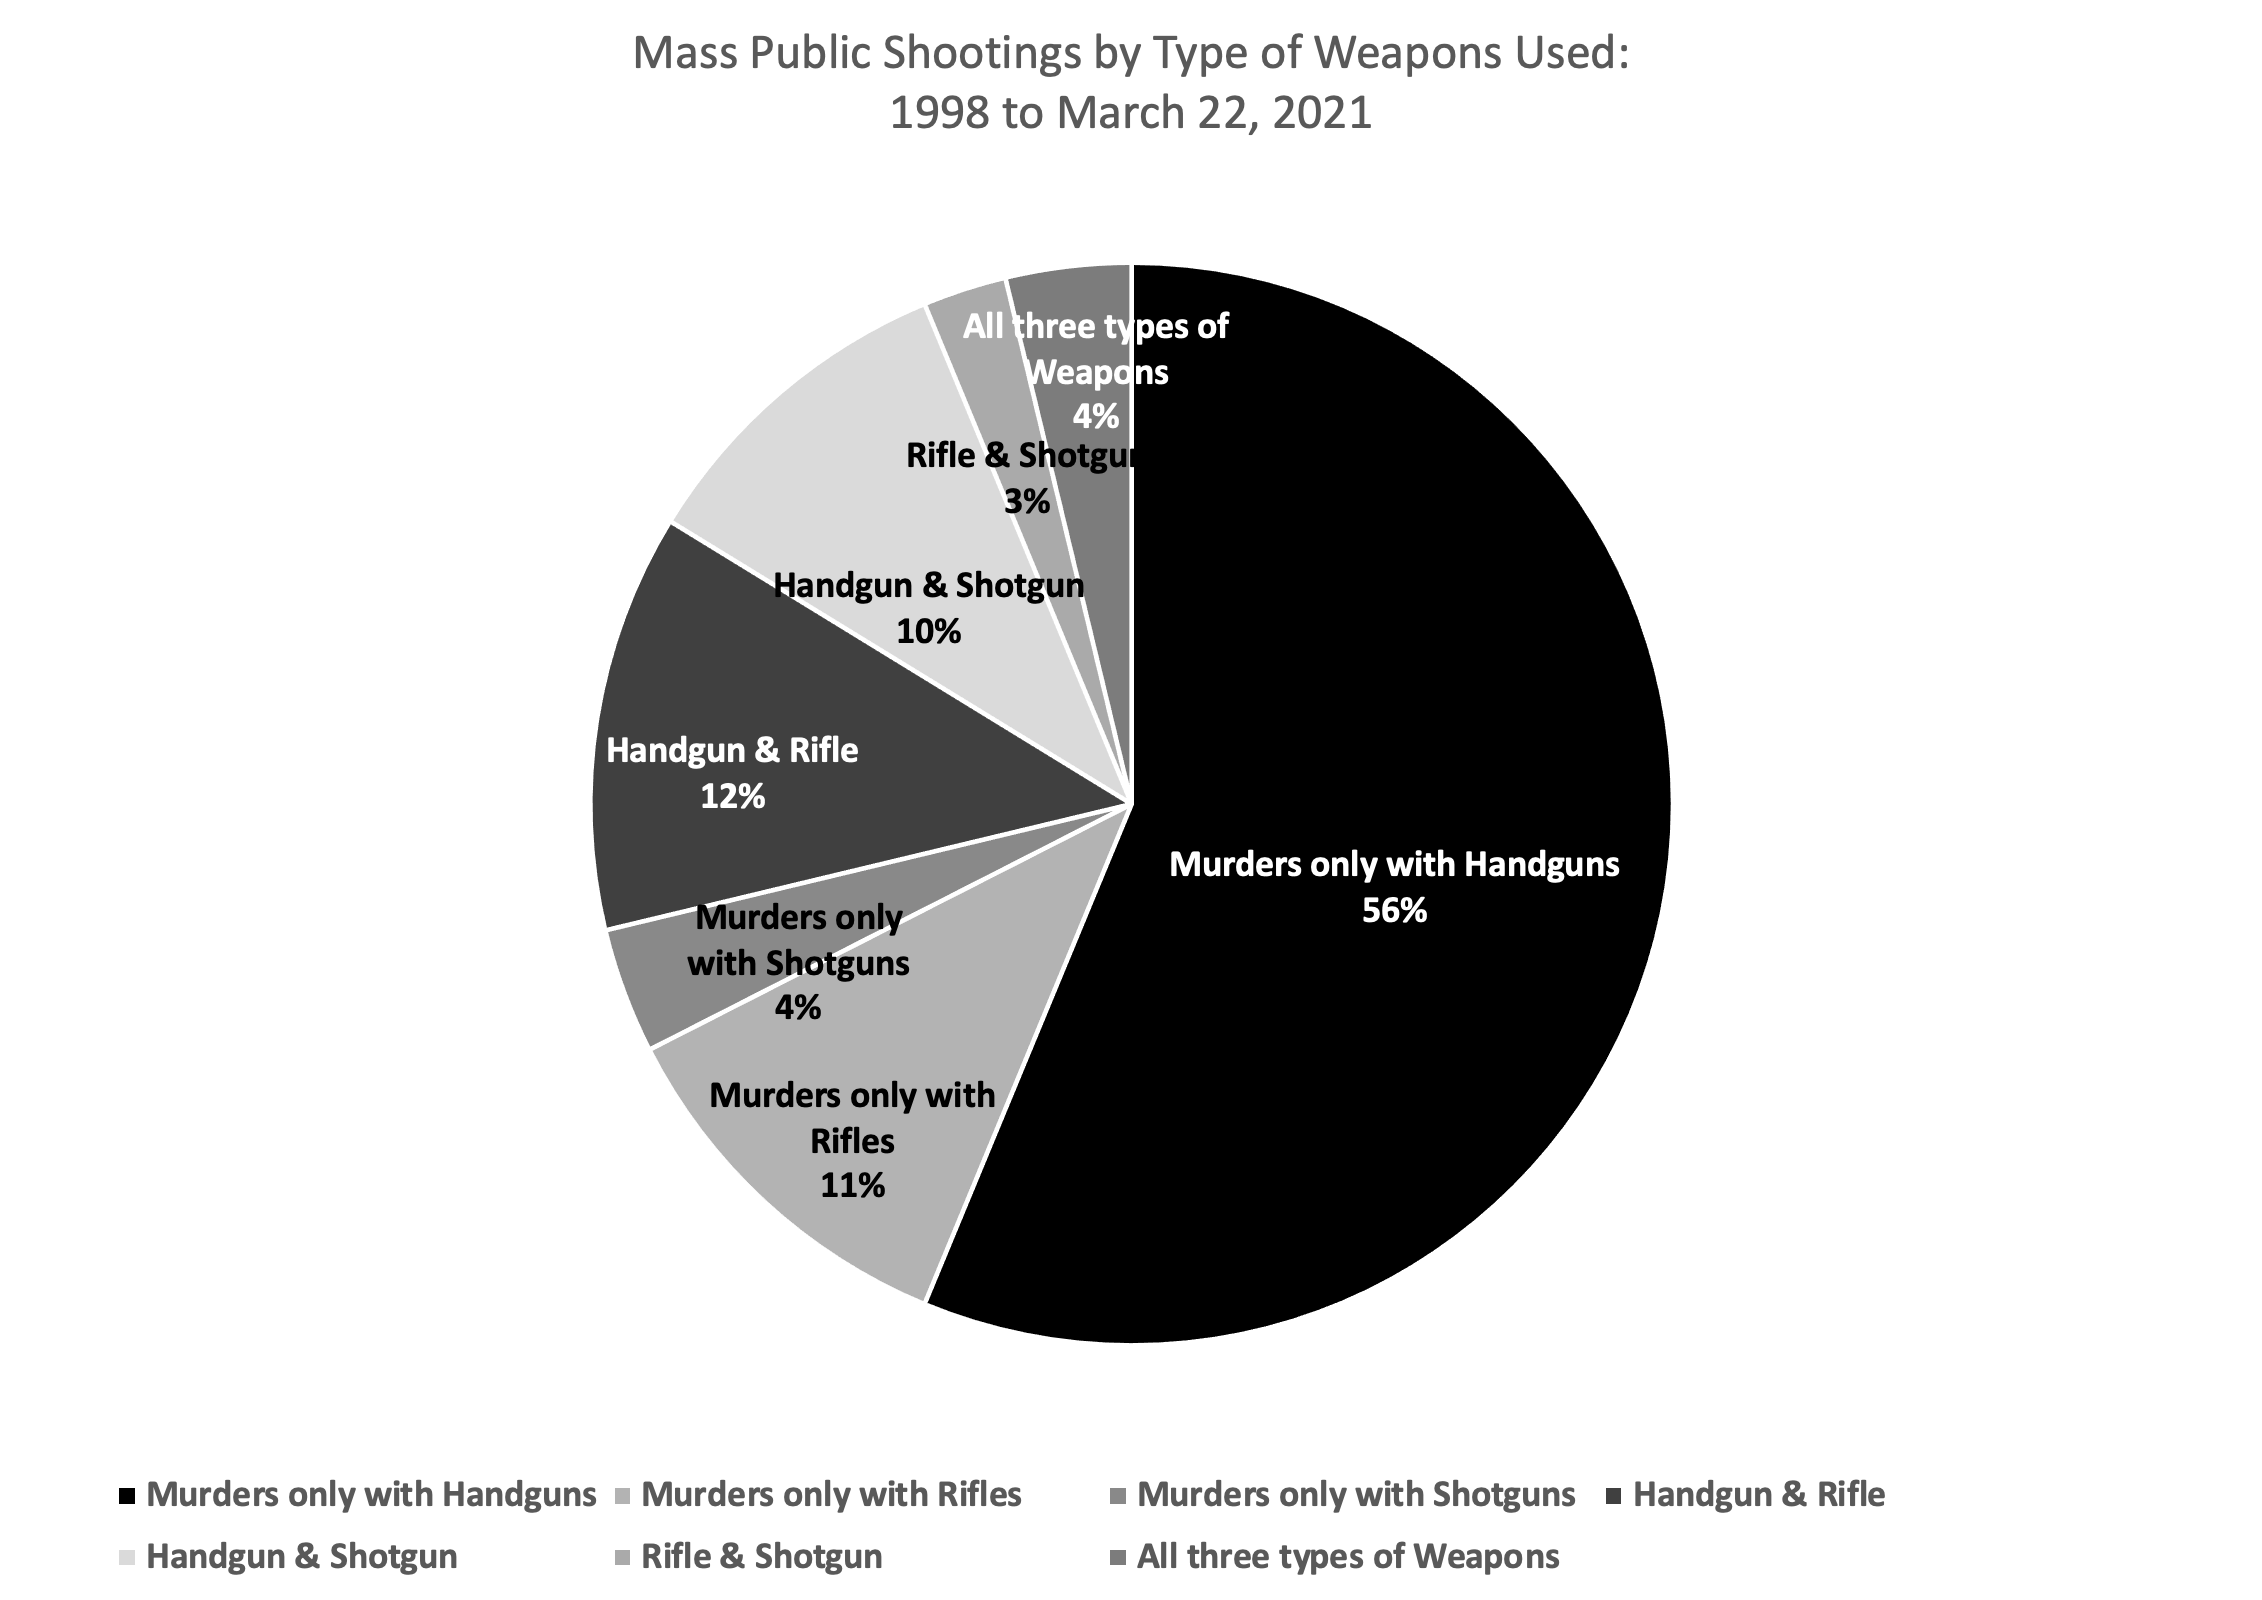 Gun Control Myths: The lie that AR-15s are the weapon of choice of Mass Public Shooters